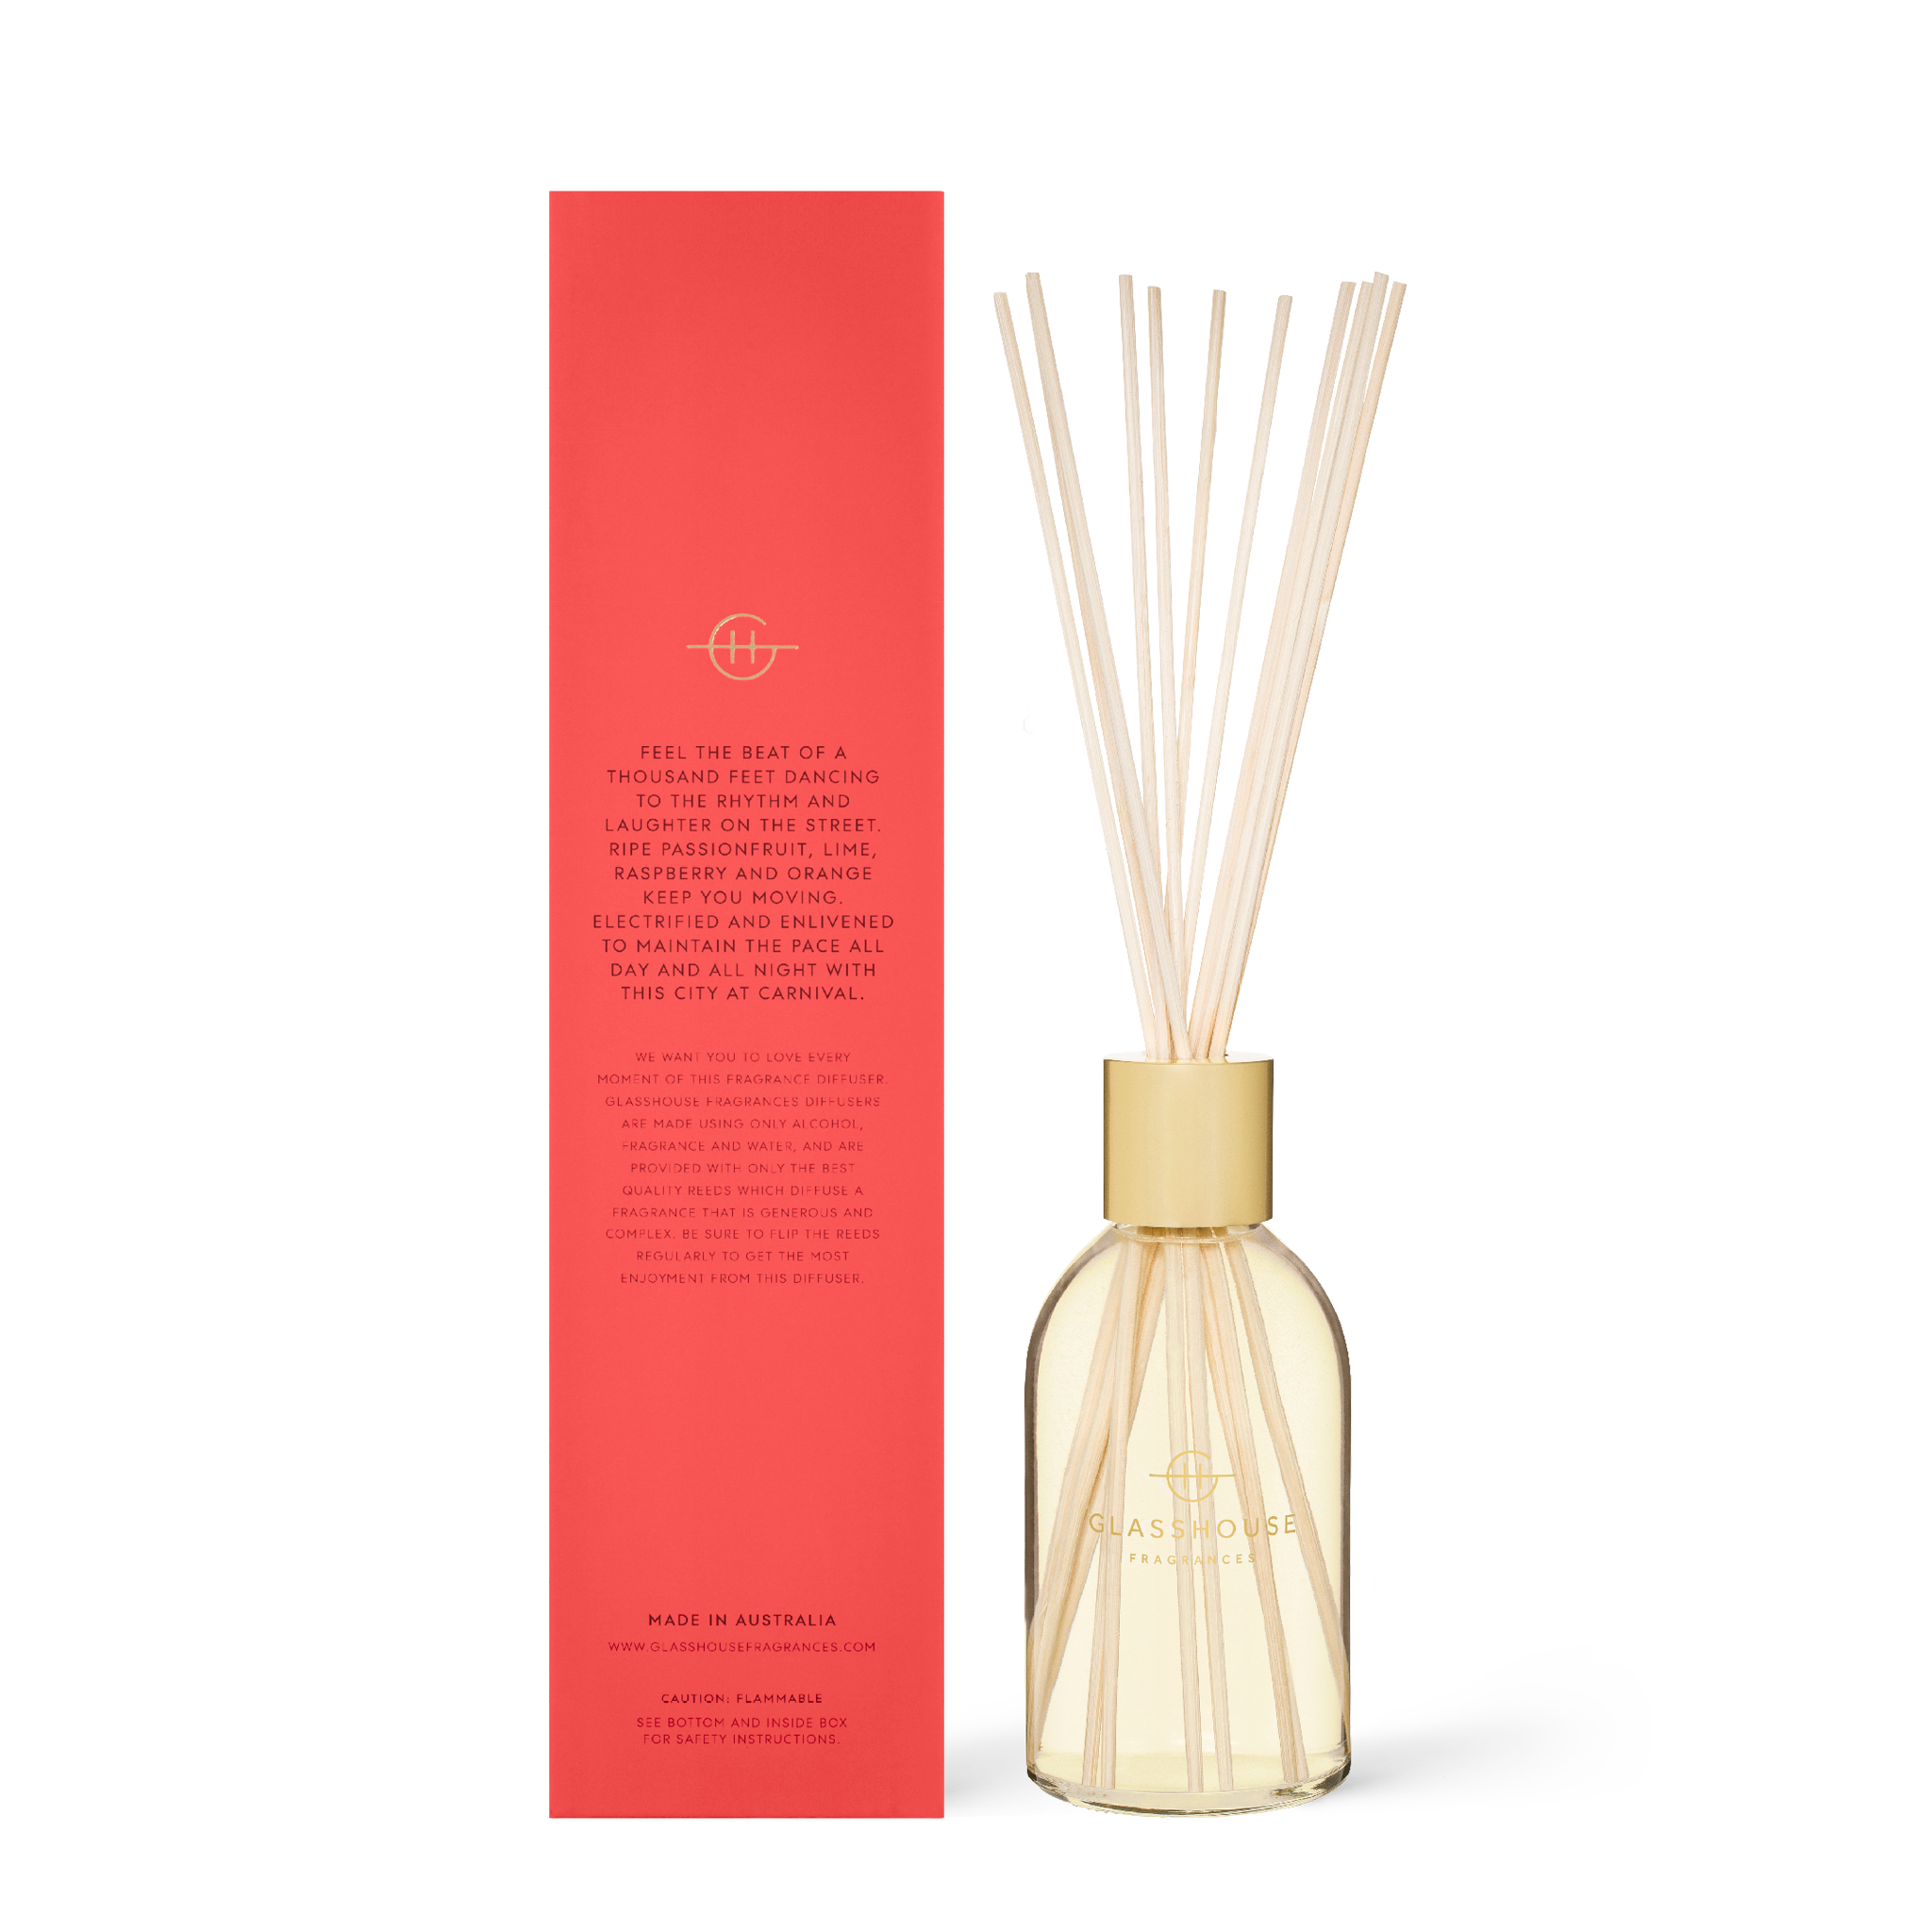 Glasshouse Fragrances One Night in Rio Passionfruit and Lime 250mL Fragrance Diffuser with box - back of product shot